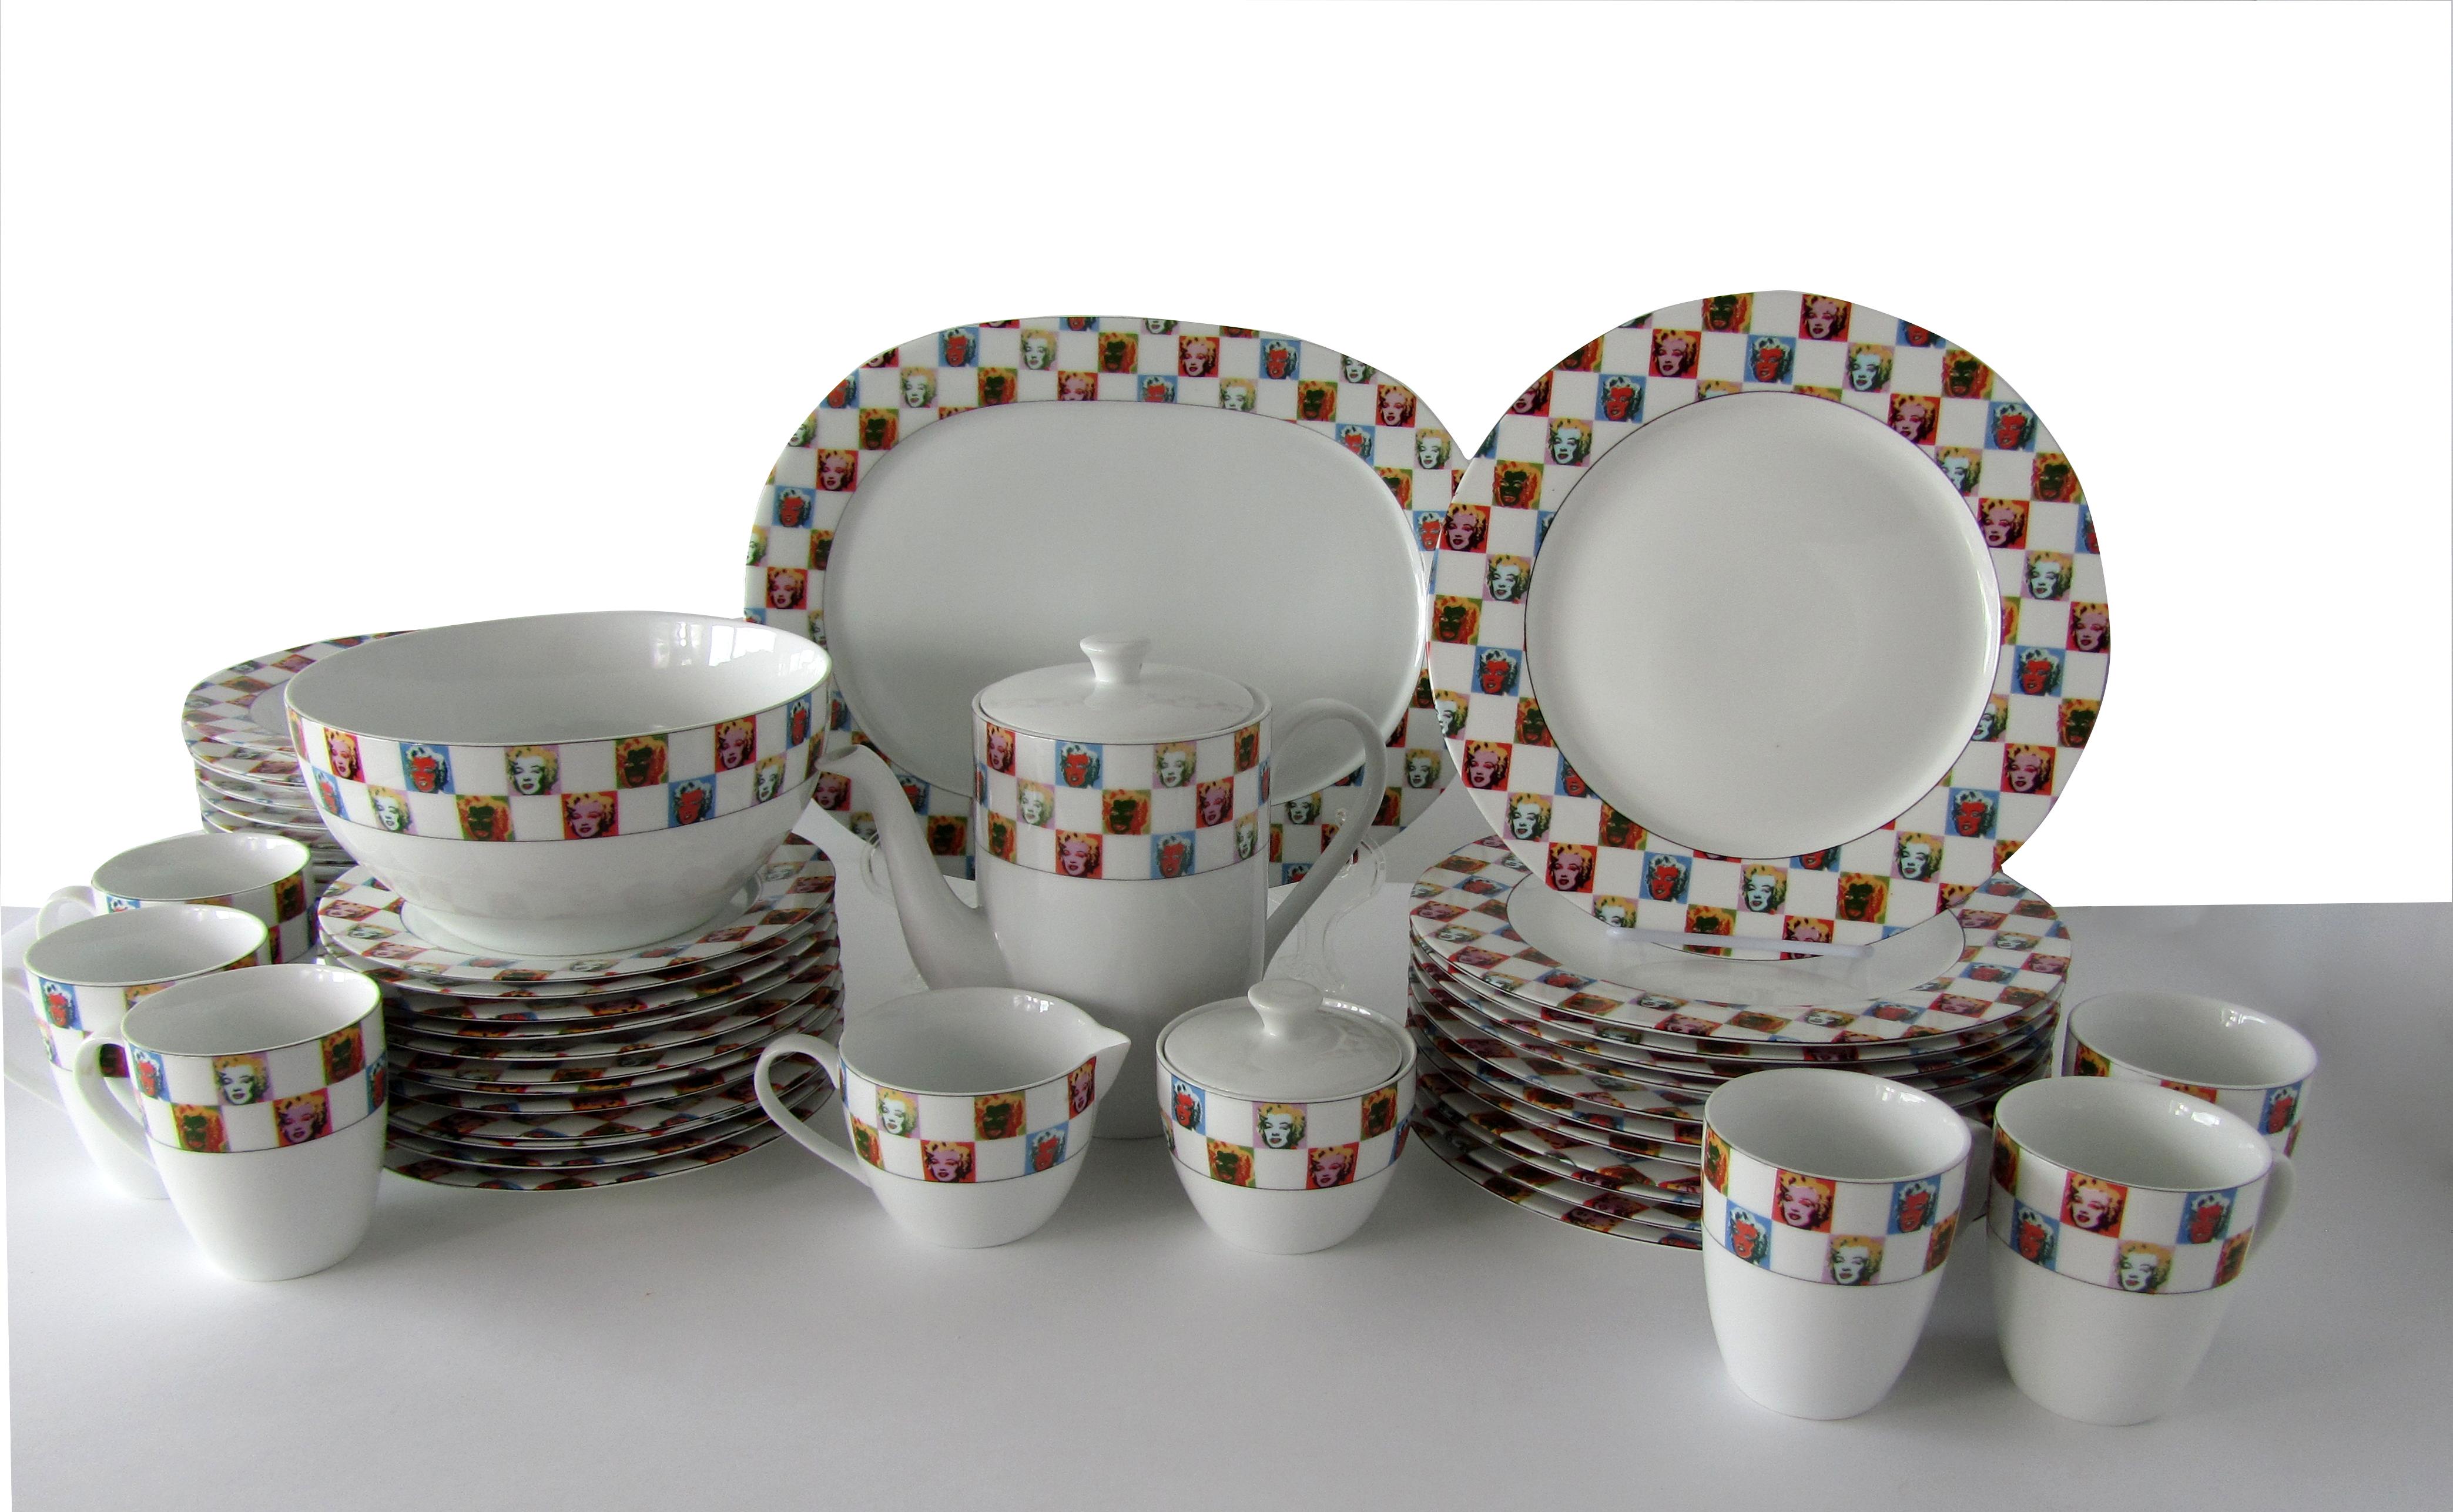 Porcelain Set of 12 Place Settings Andy Warhol Some Like It Hot, Marilyn, Dinnerware